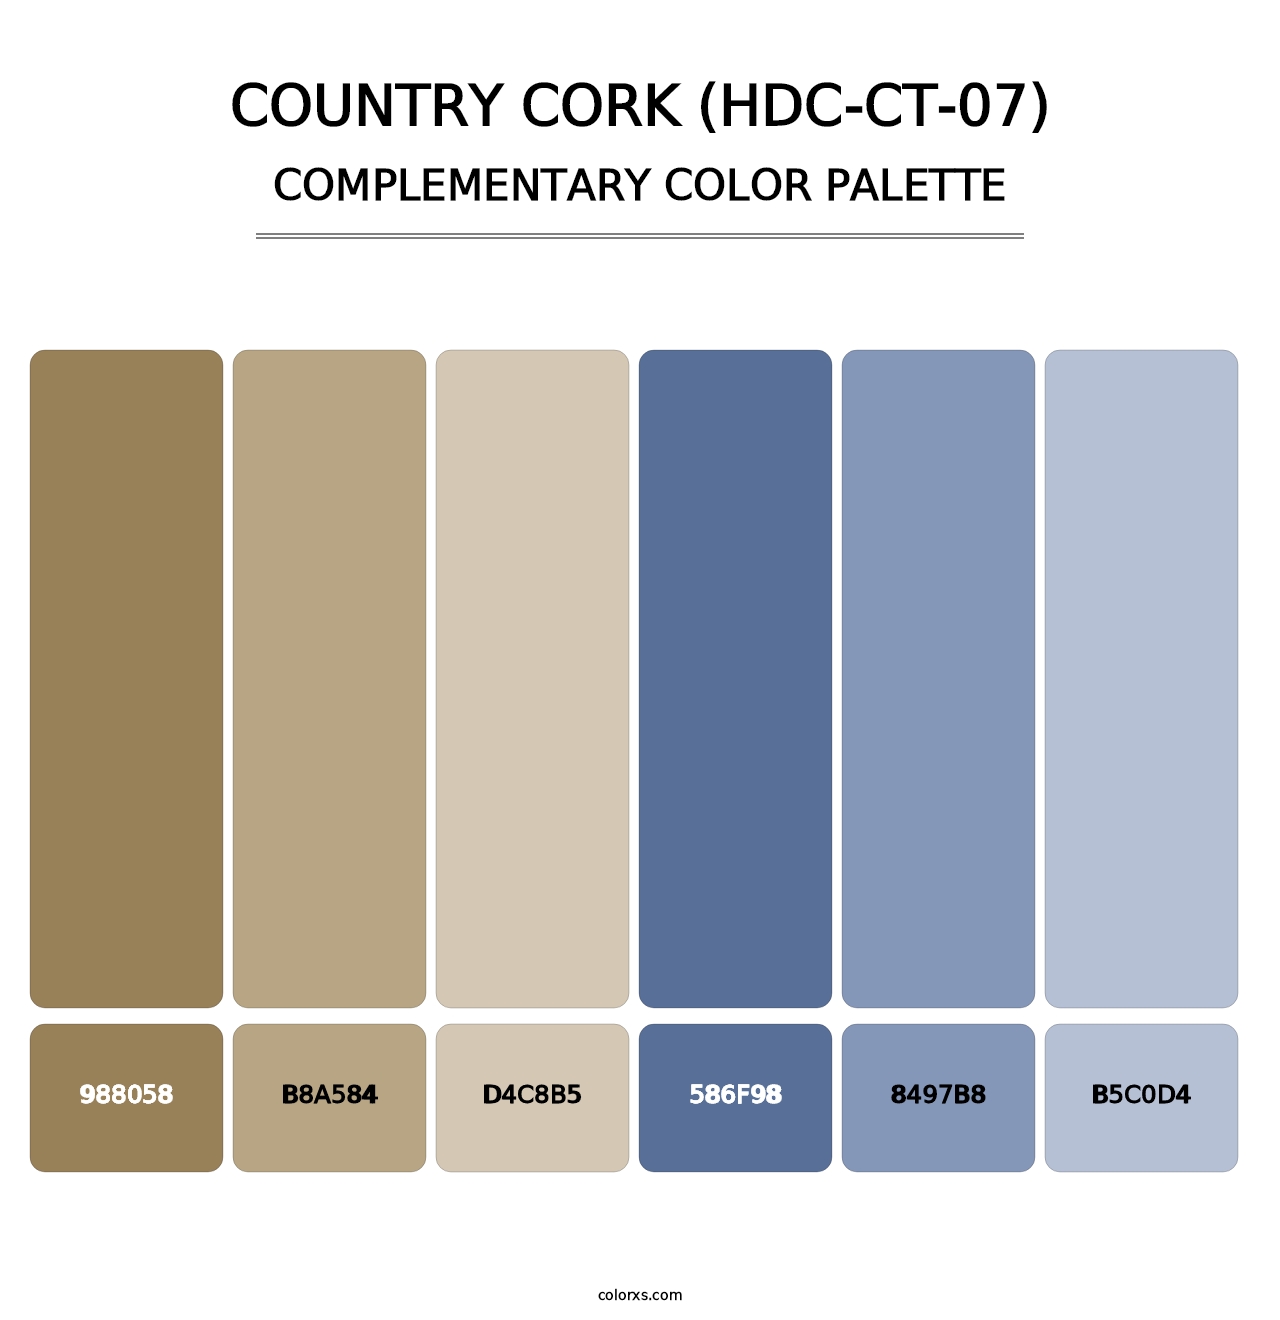 Country Cork (HDC-CT-07) - Complementary Color Palette